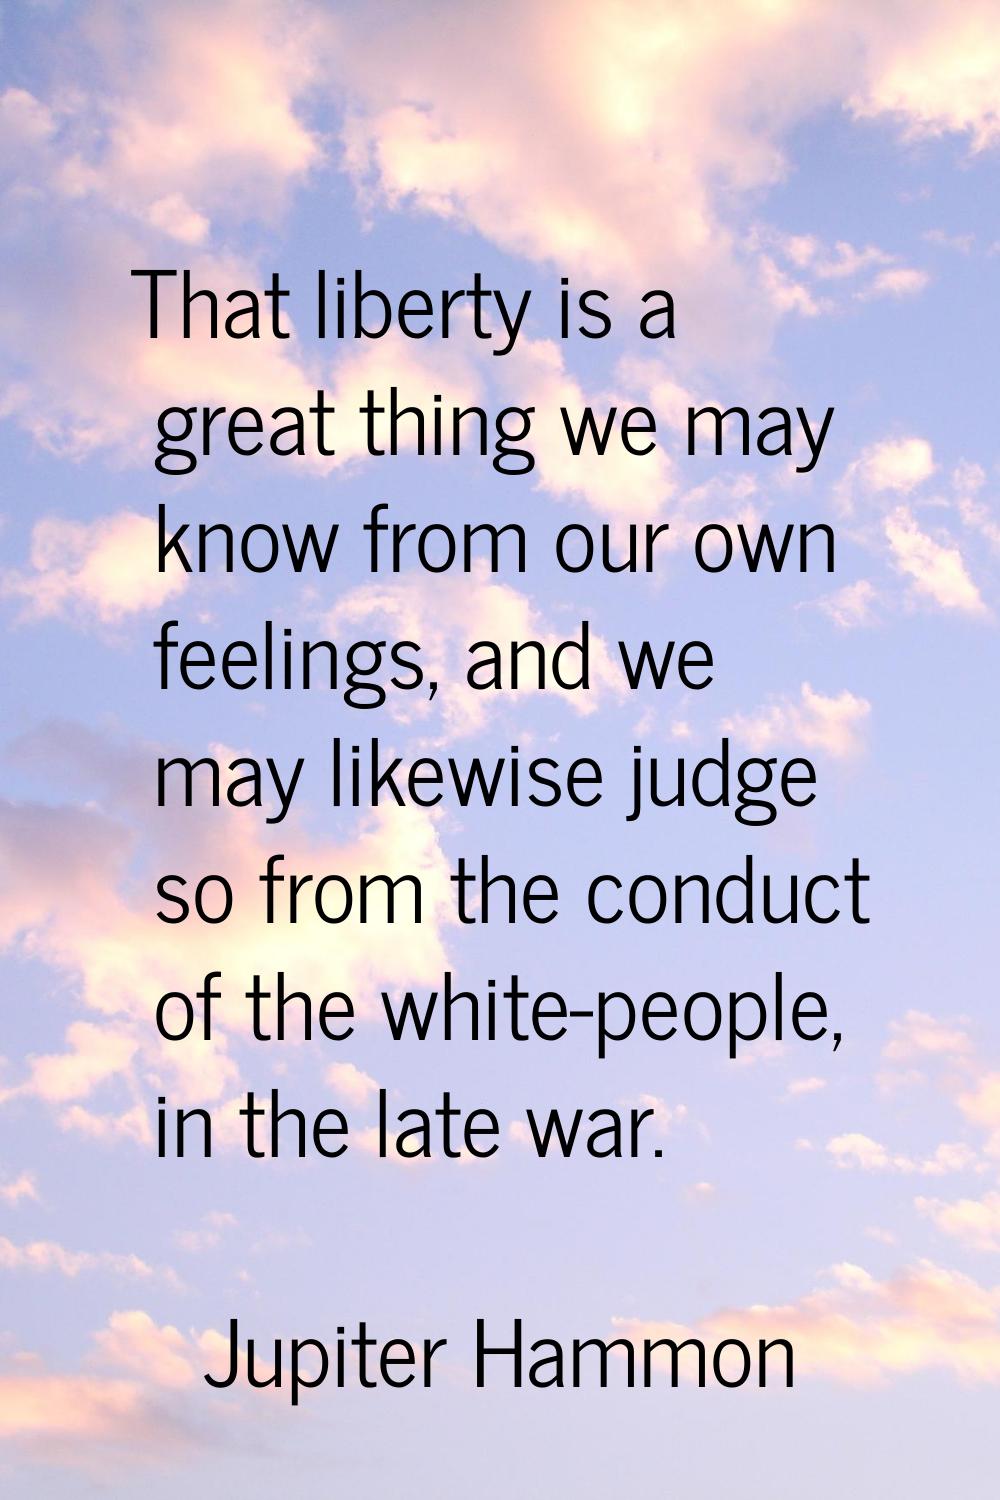 That liberty is a great thing we may know from our own feelings, and we may likewise judge so from 